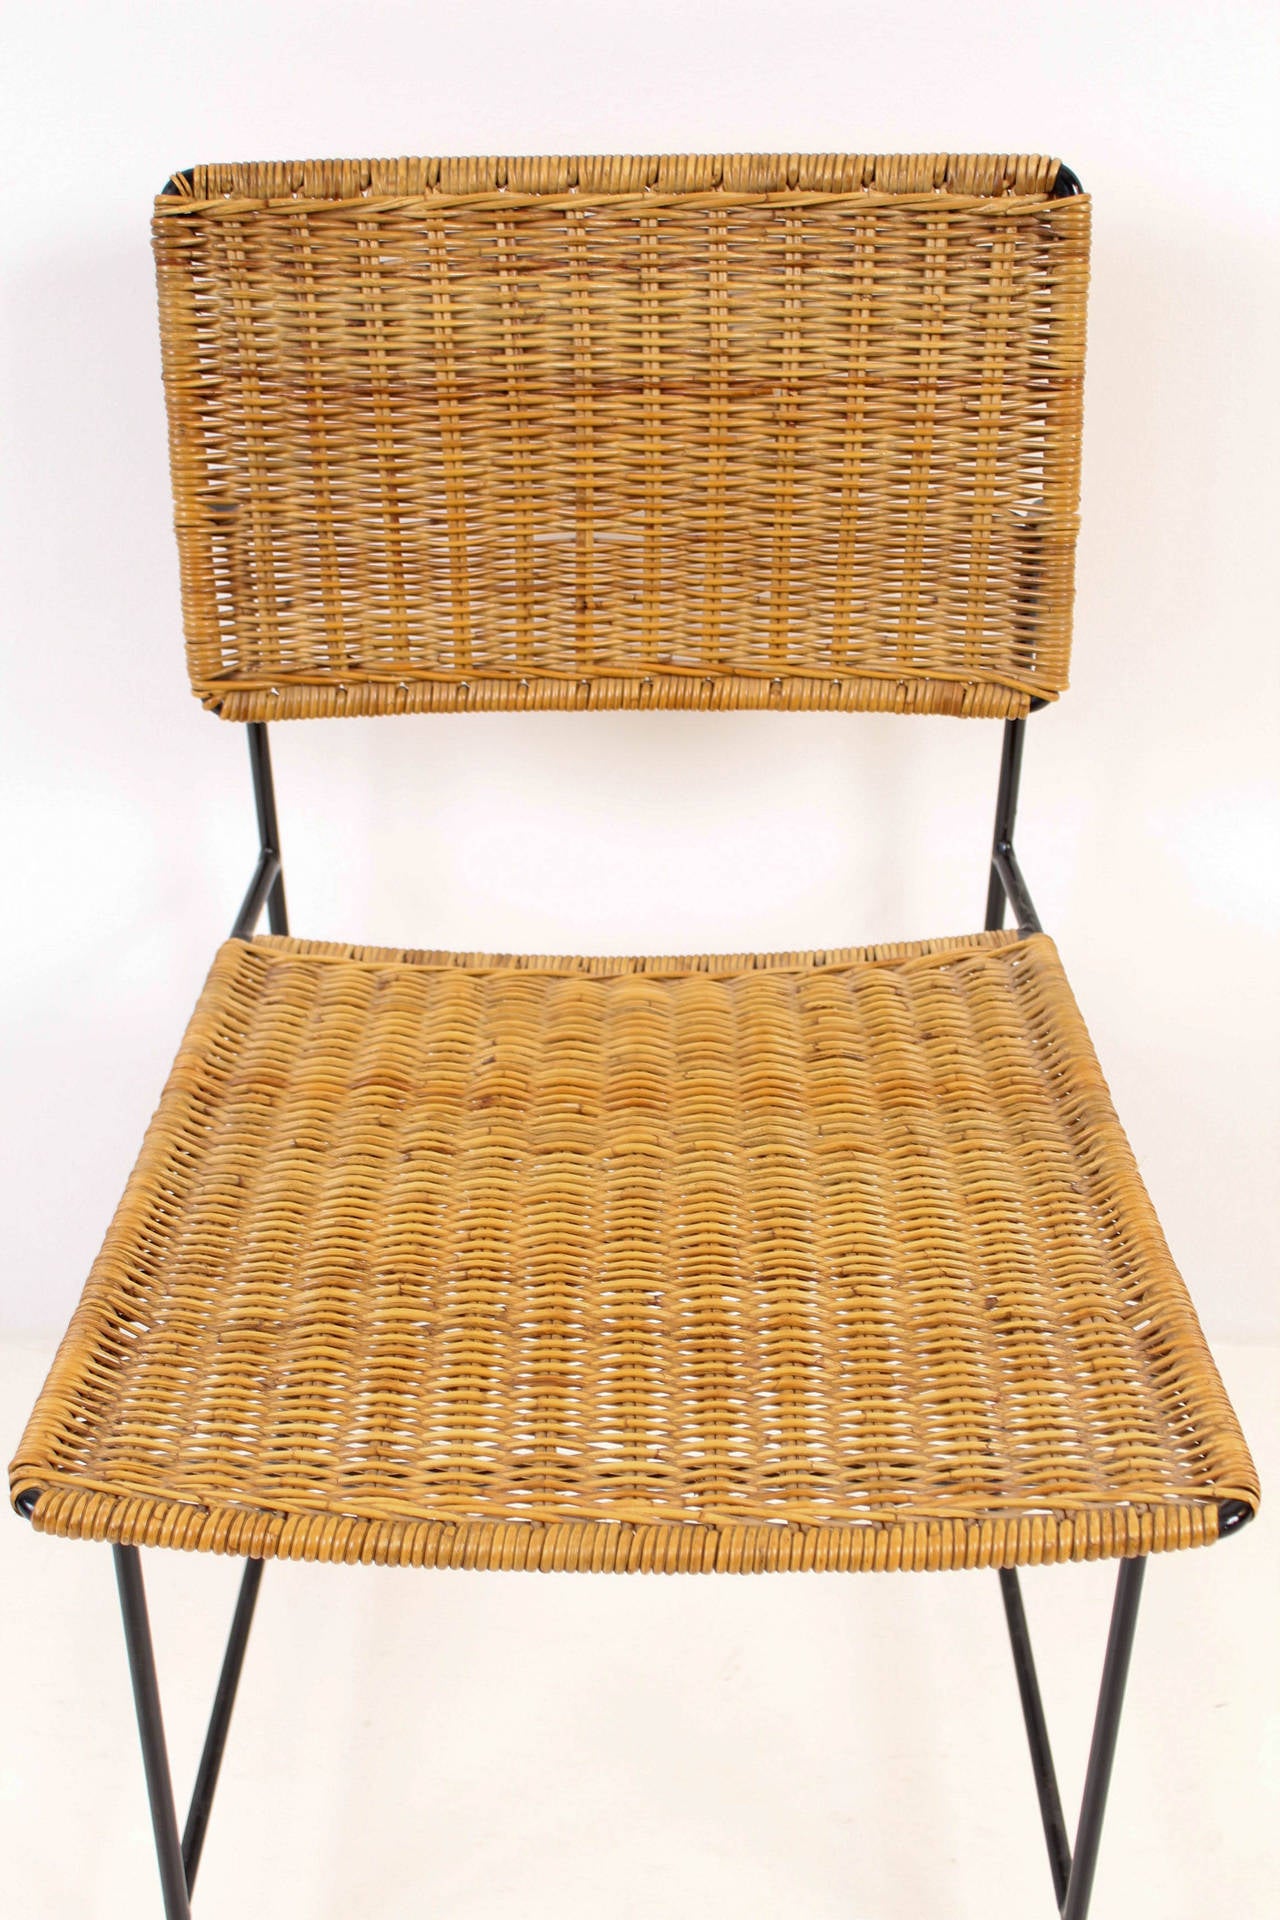 Enameled Rare Set of Six Rattan and Wire Chairs by Herta-Maria Witzemann